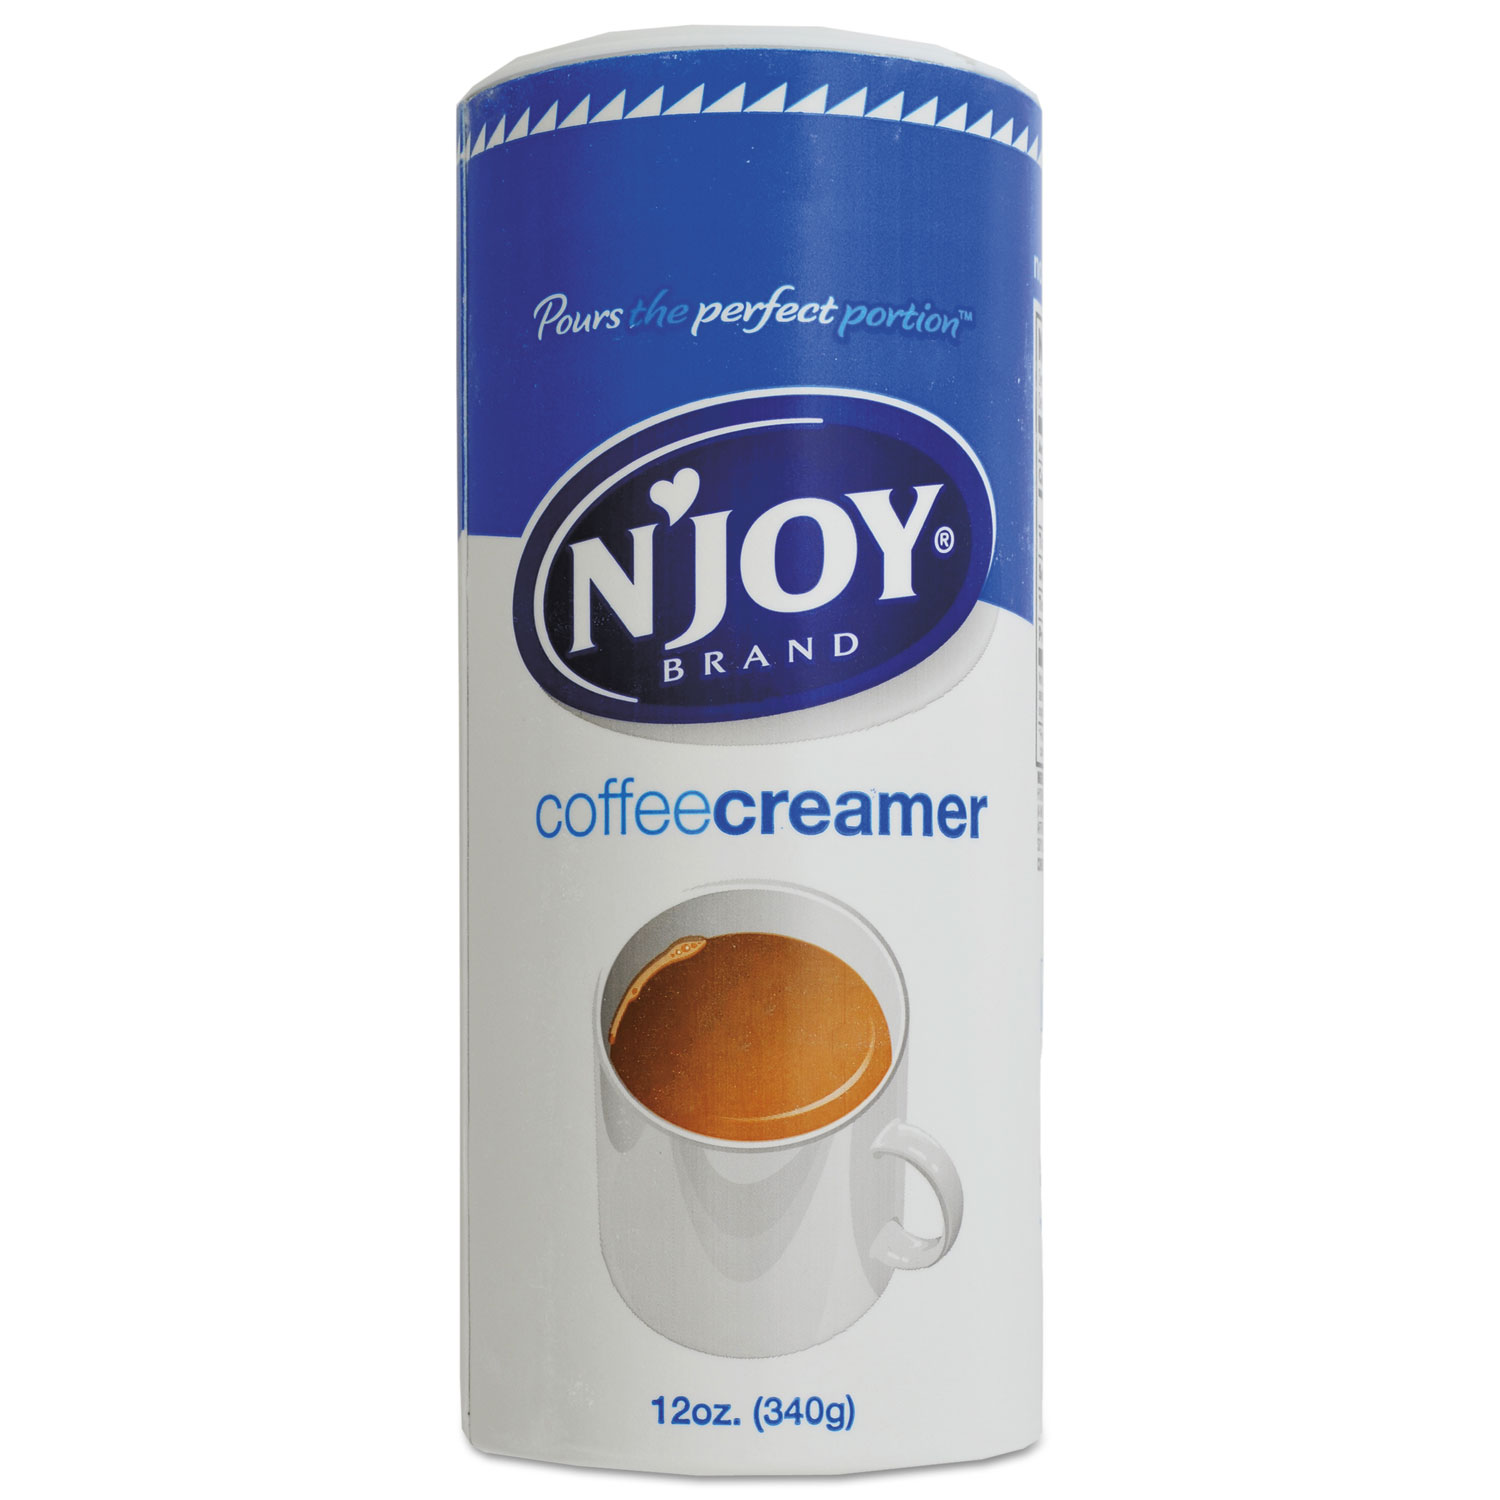 NJOY Non-Dairy Coffee Creamer, Original, 12 Oz Canister, 3/Pack